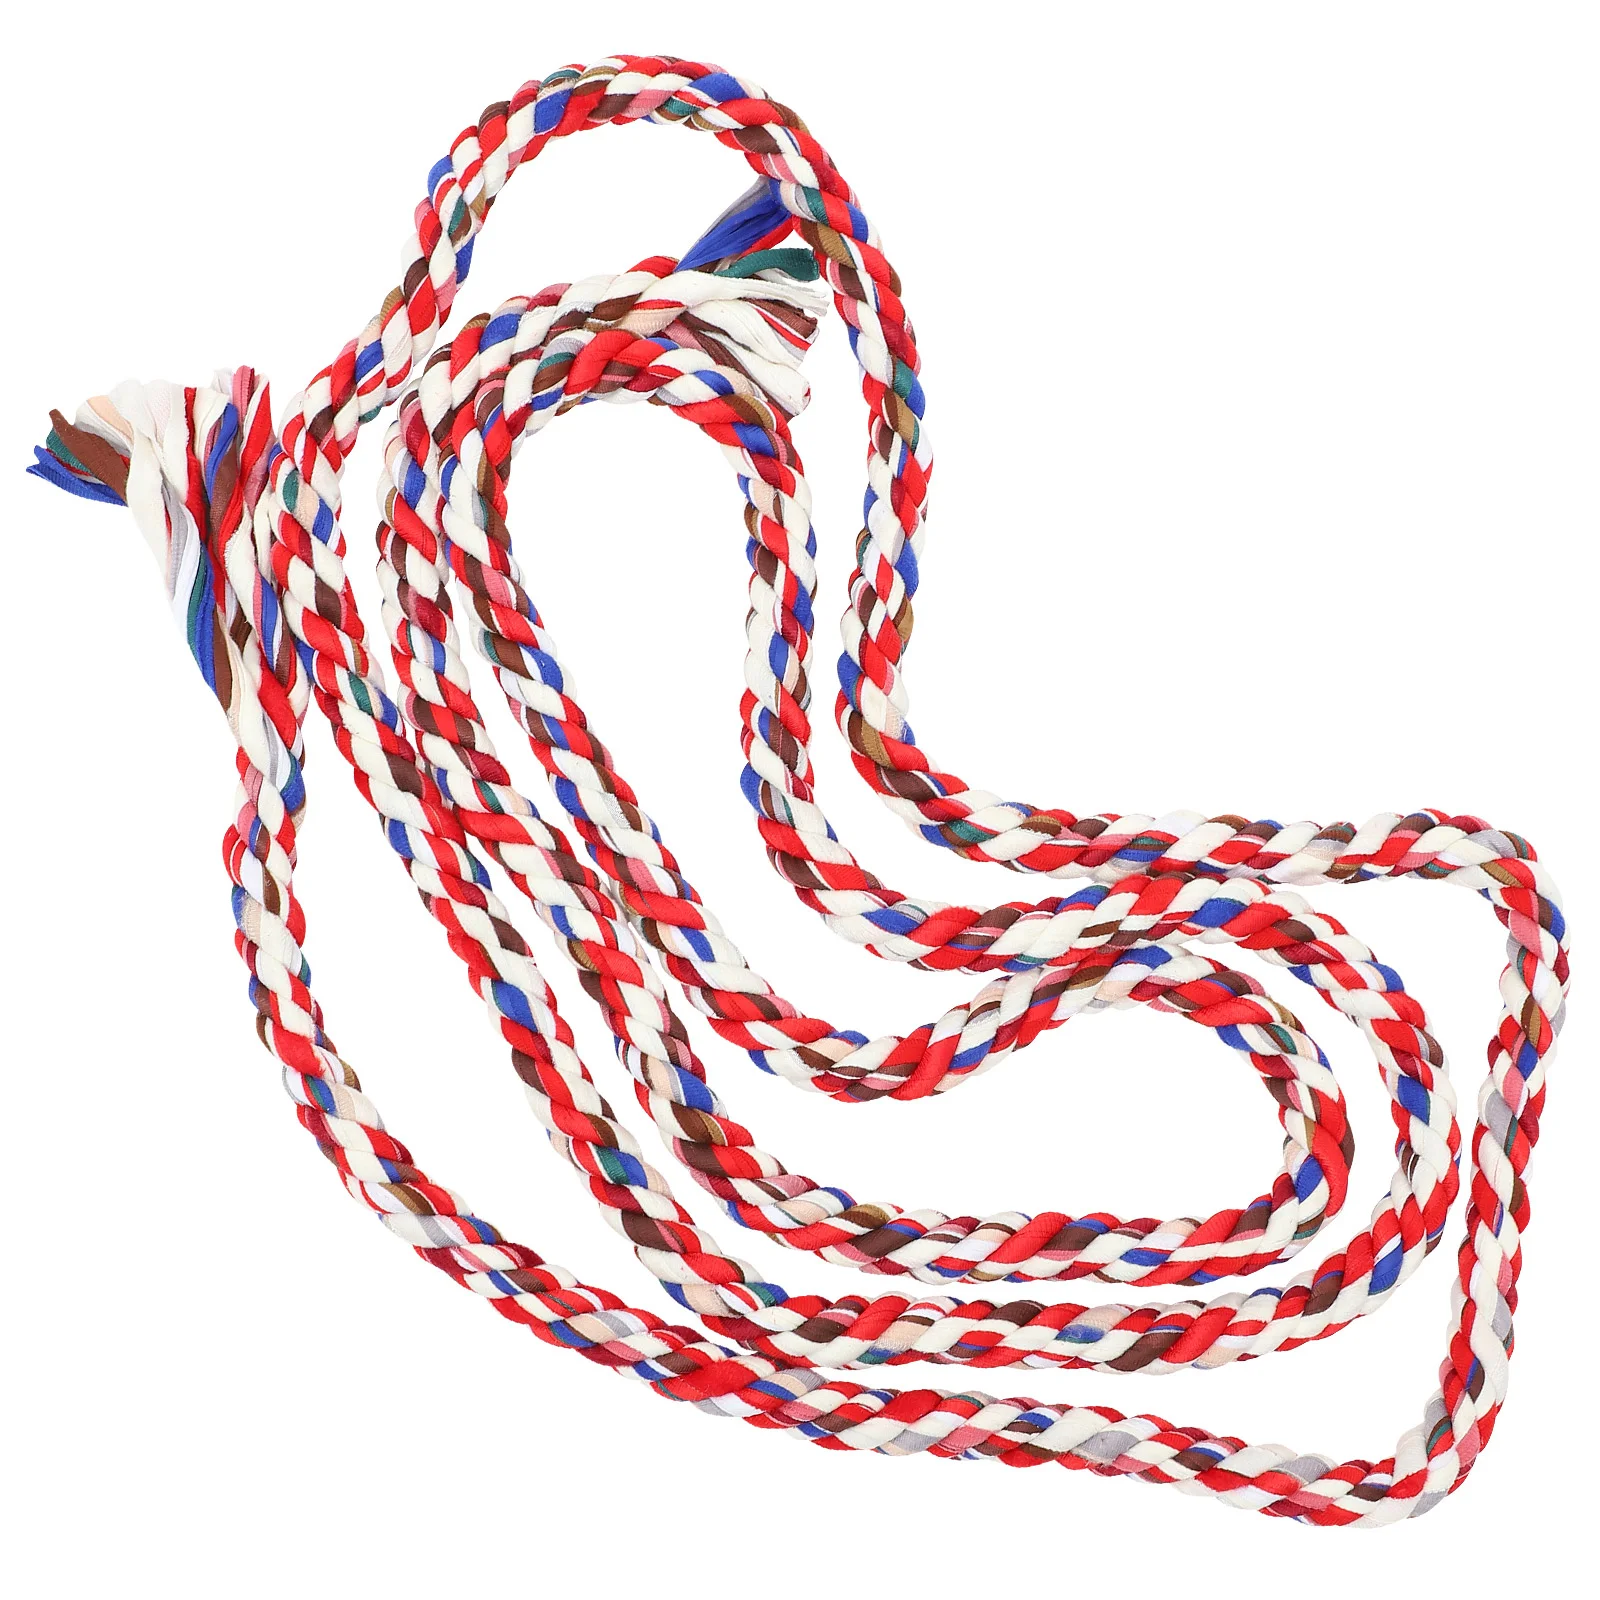 

Tug-of-war Rope Practical Twisted Rope Competition Tug Rope School Game Rope